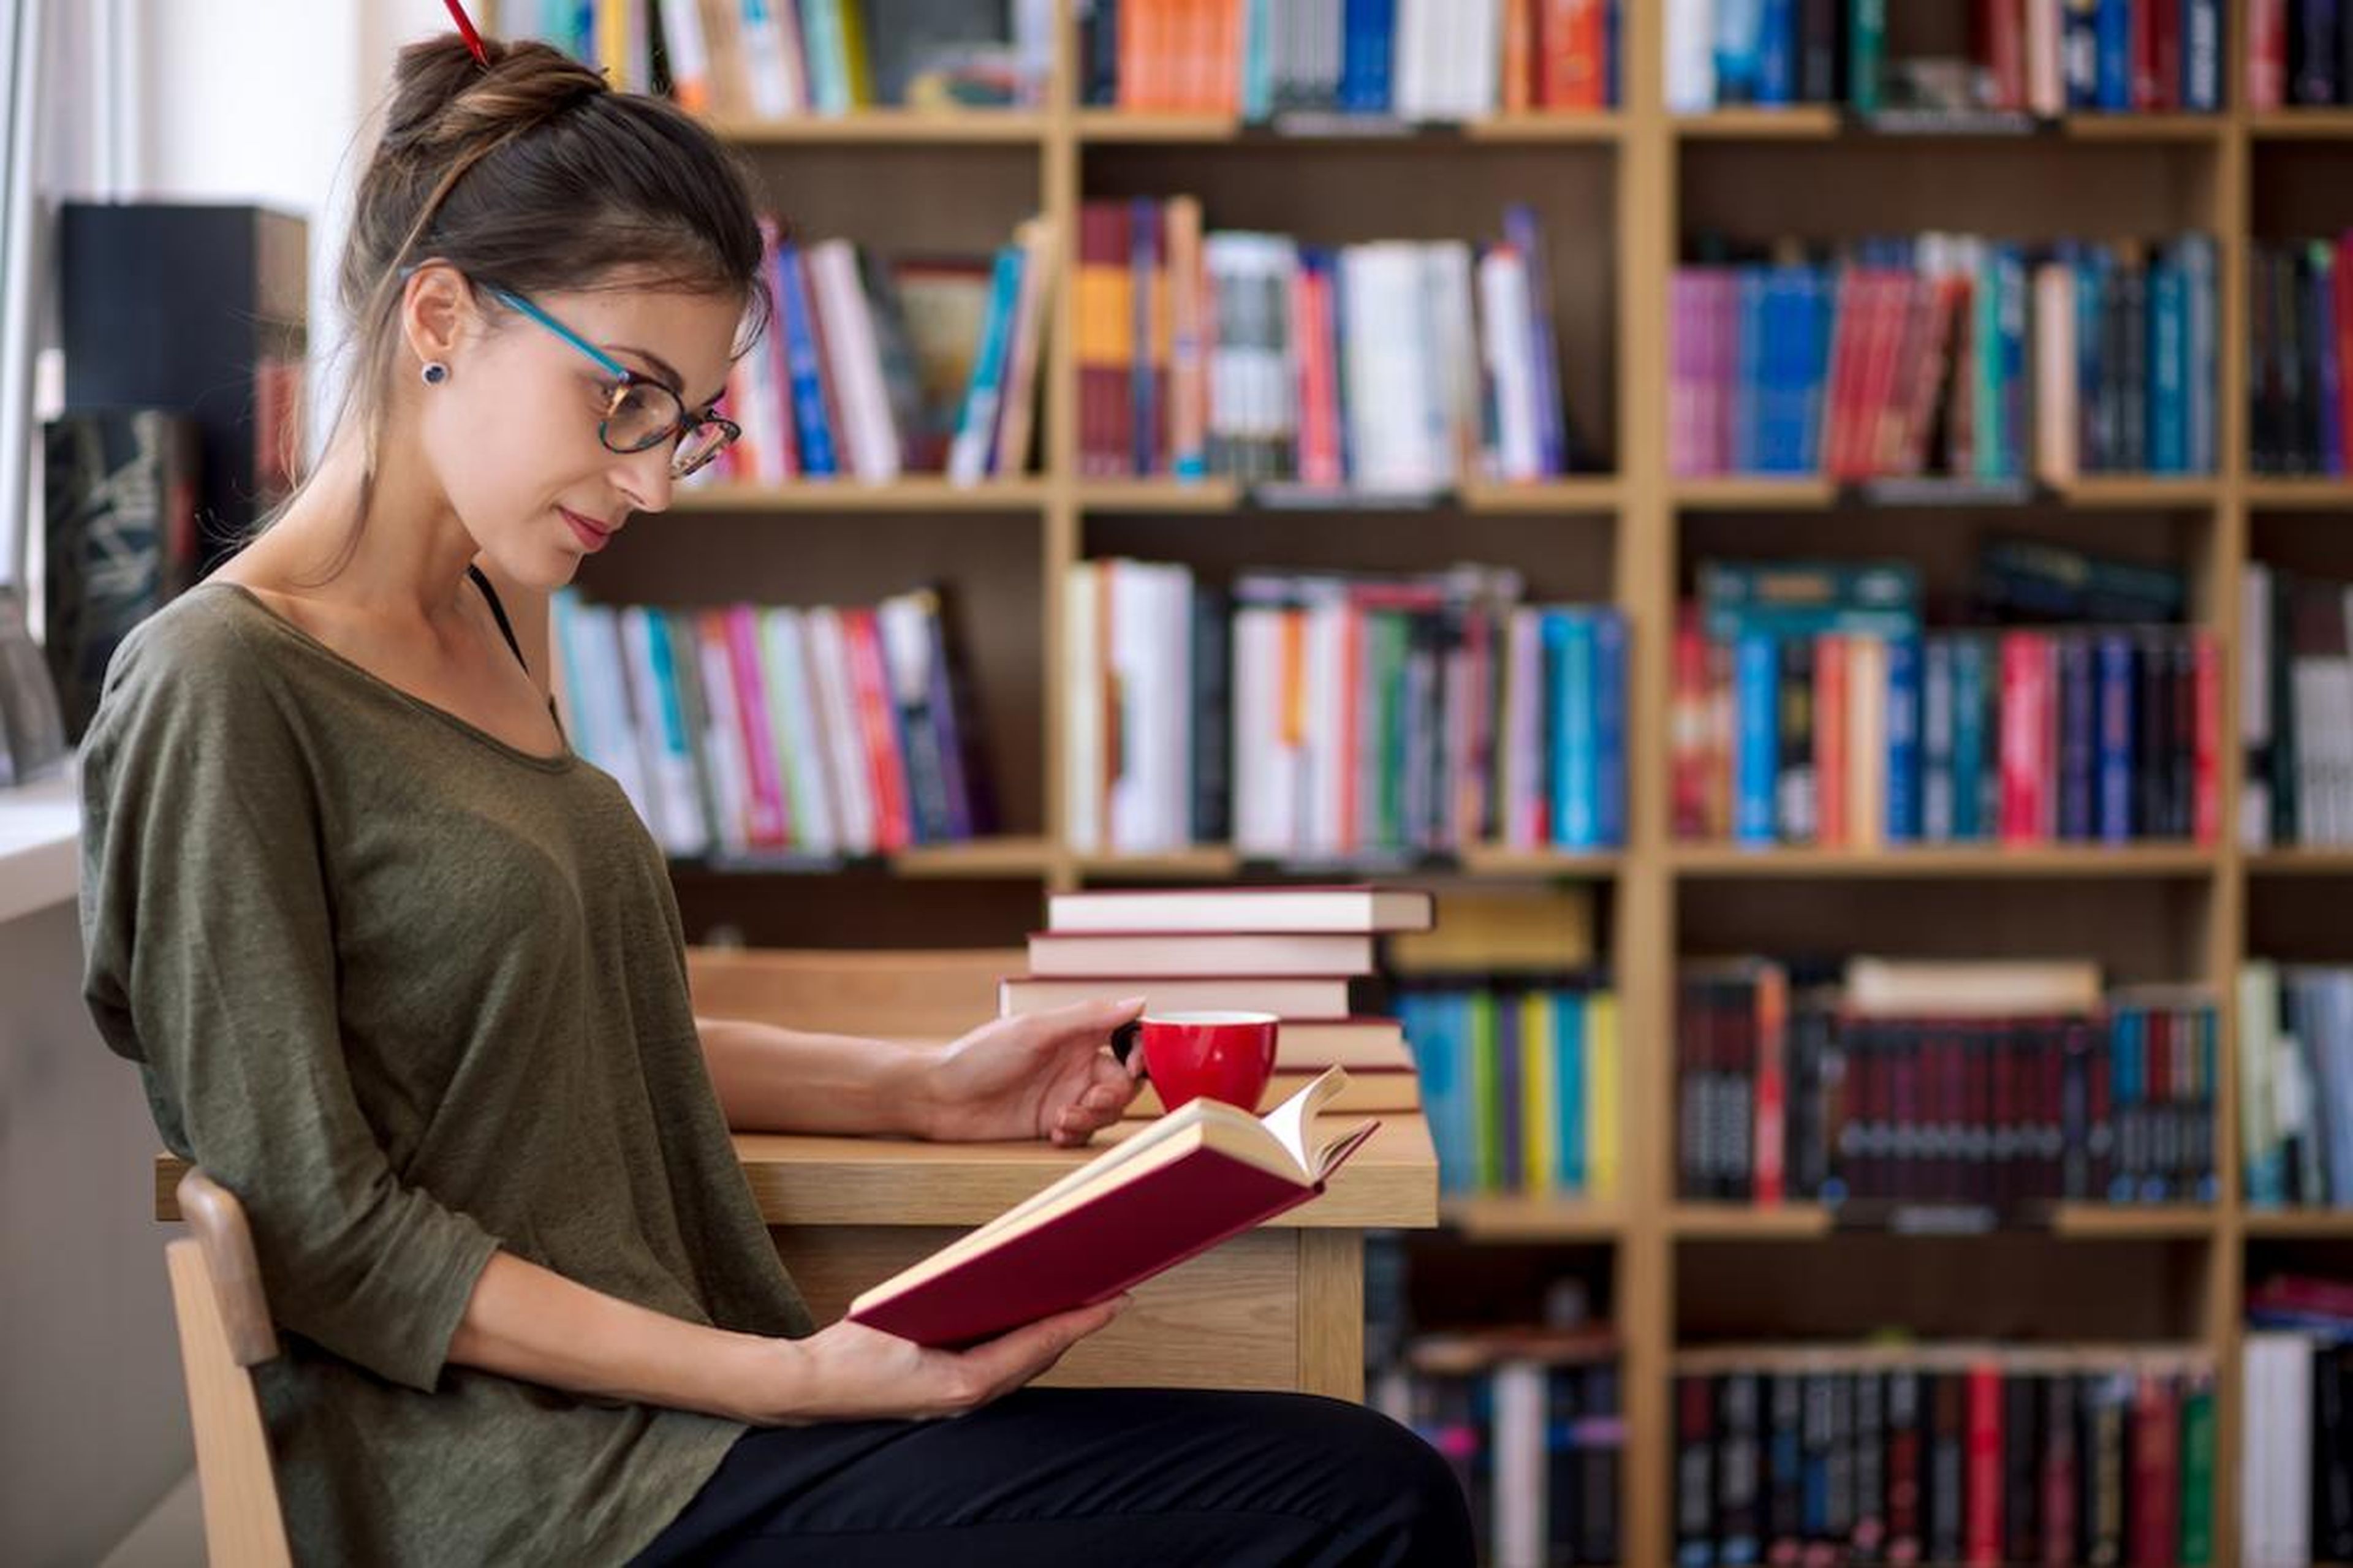 If you're having trouble saving money, these 11 books may be useful to you.